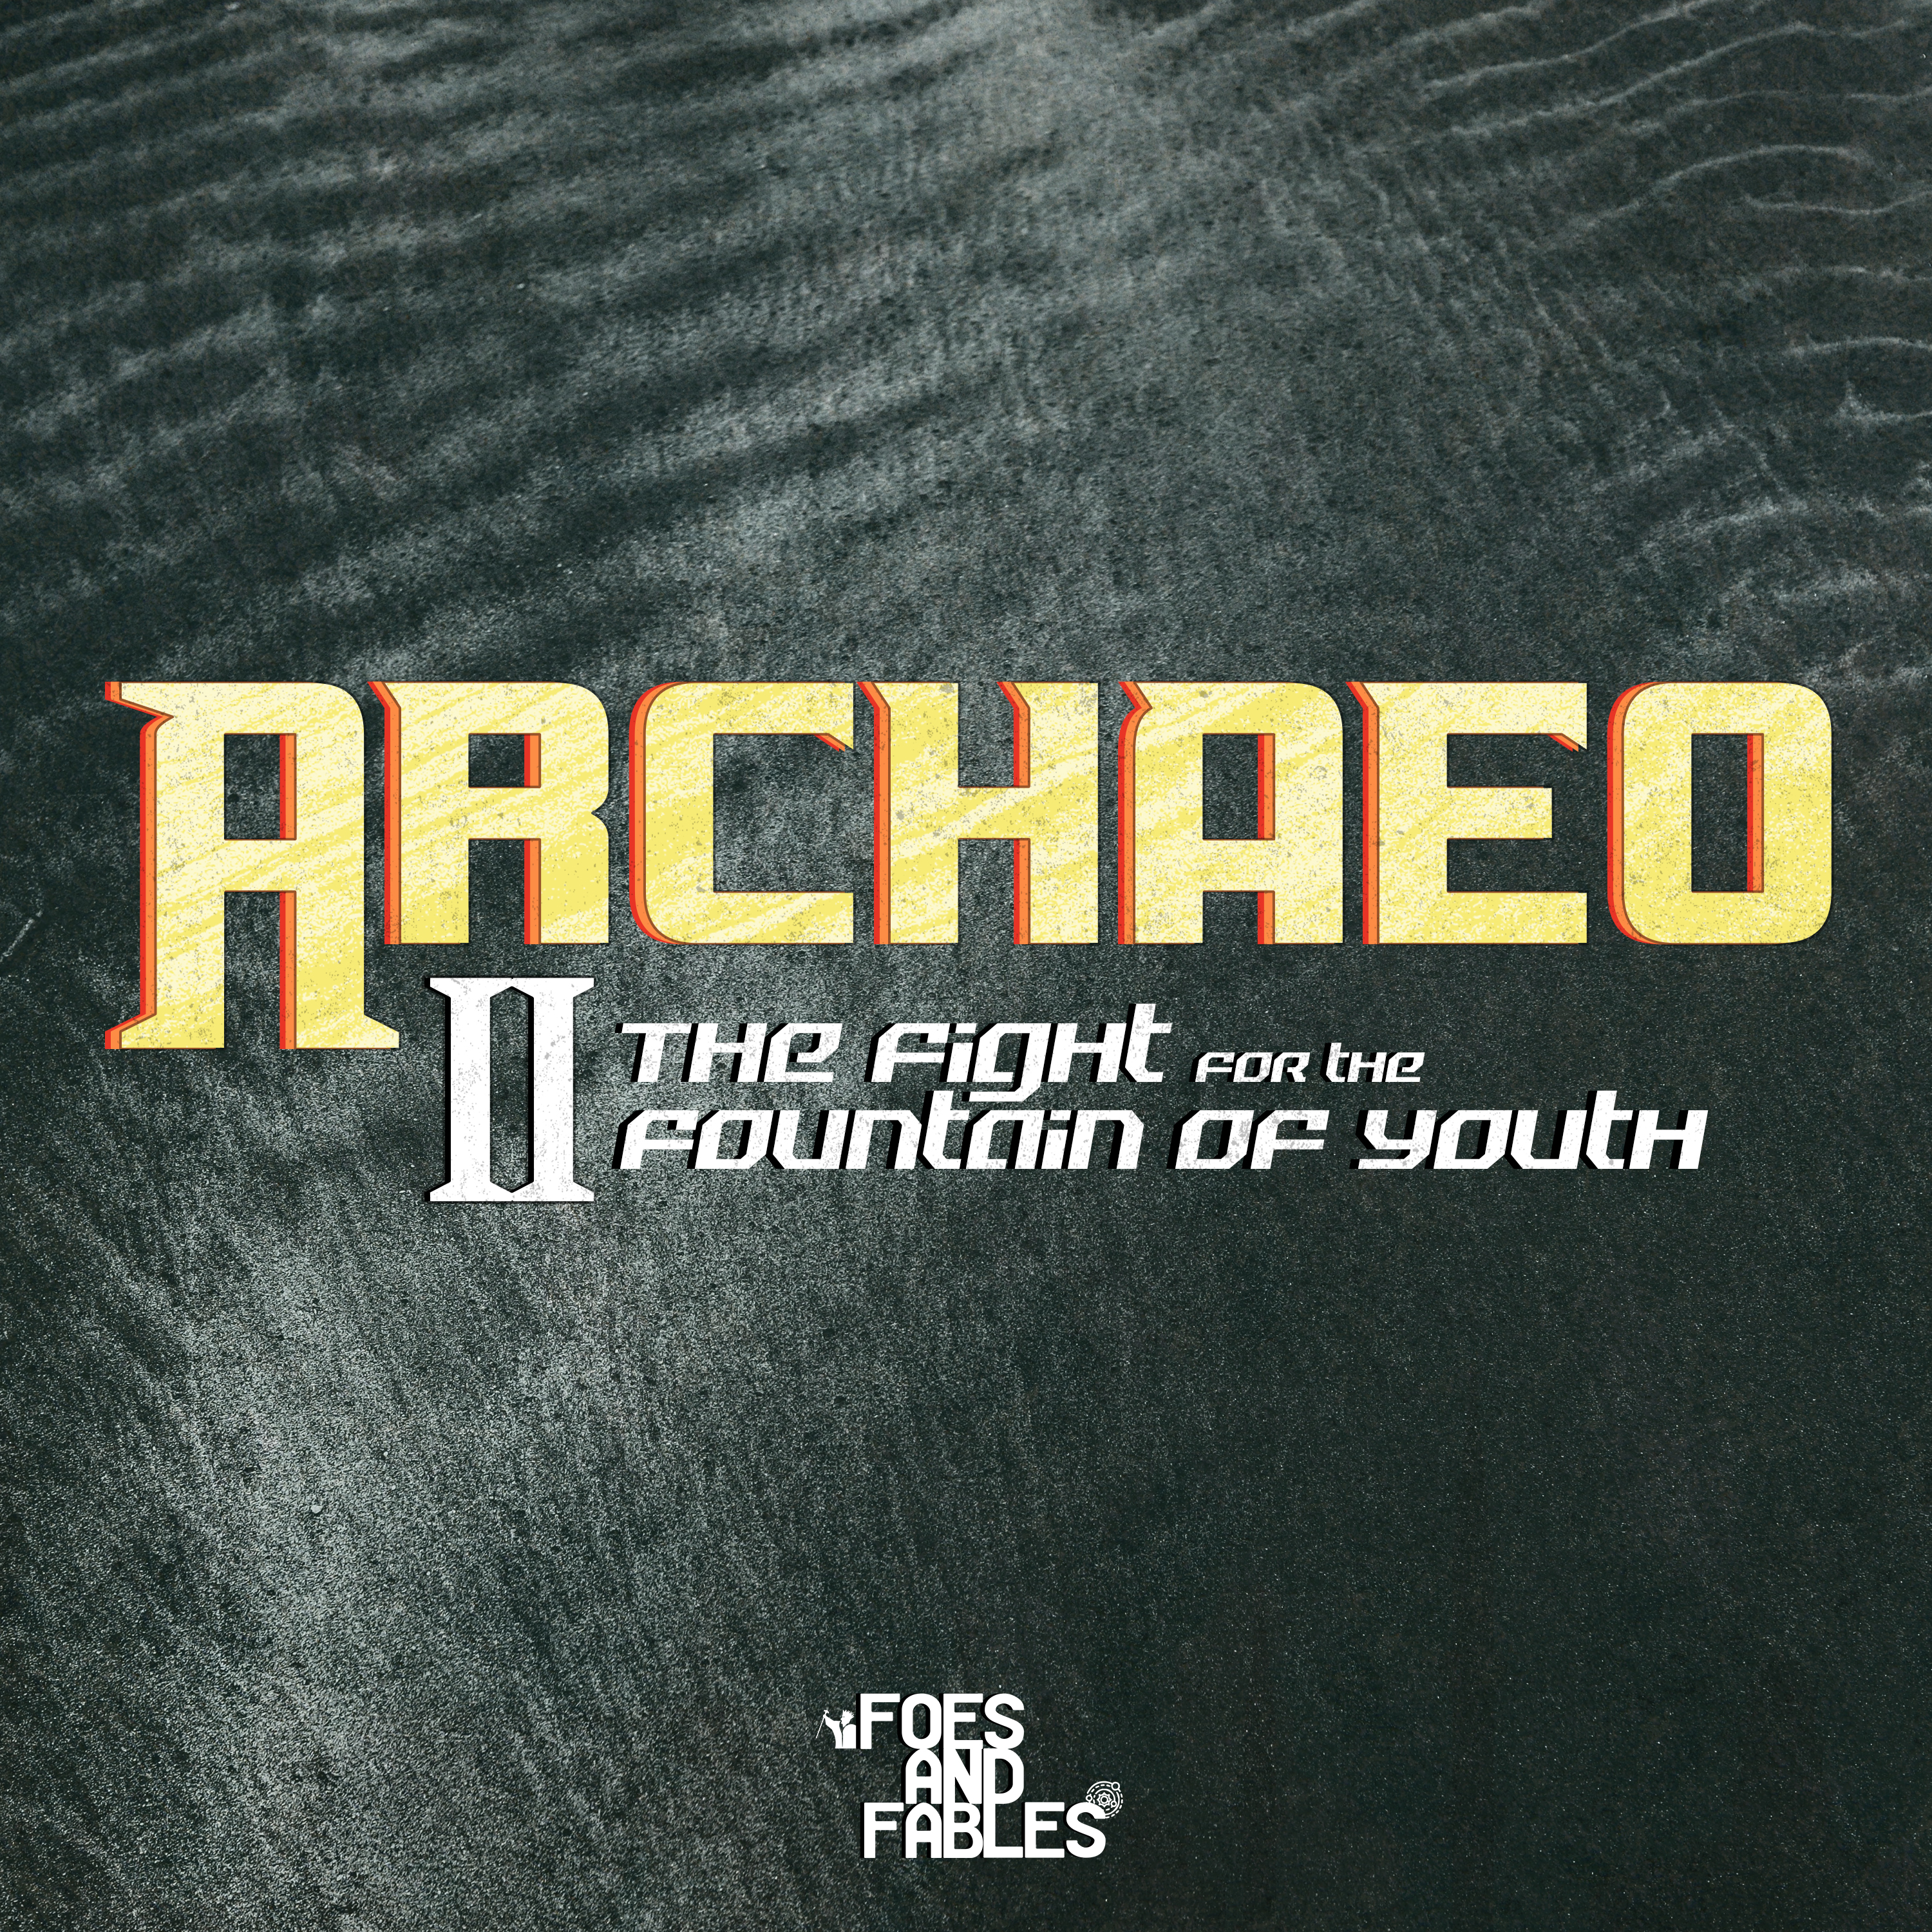 1. The Origin of Adventure | ARCHAEO II: The Fight for the Fountain of Youth